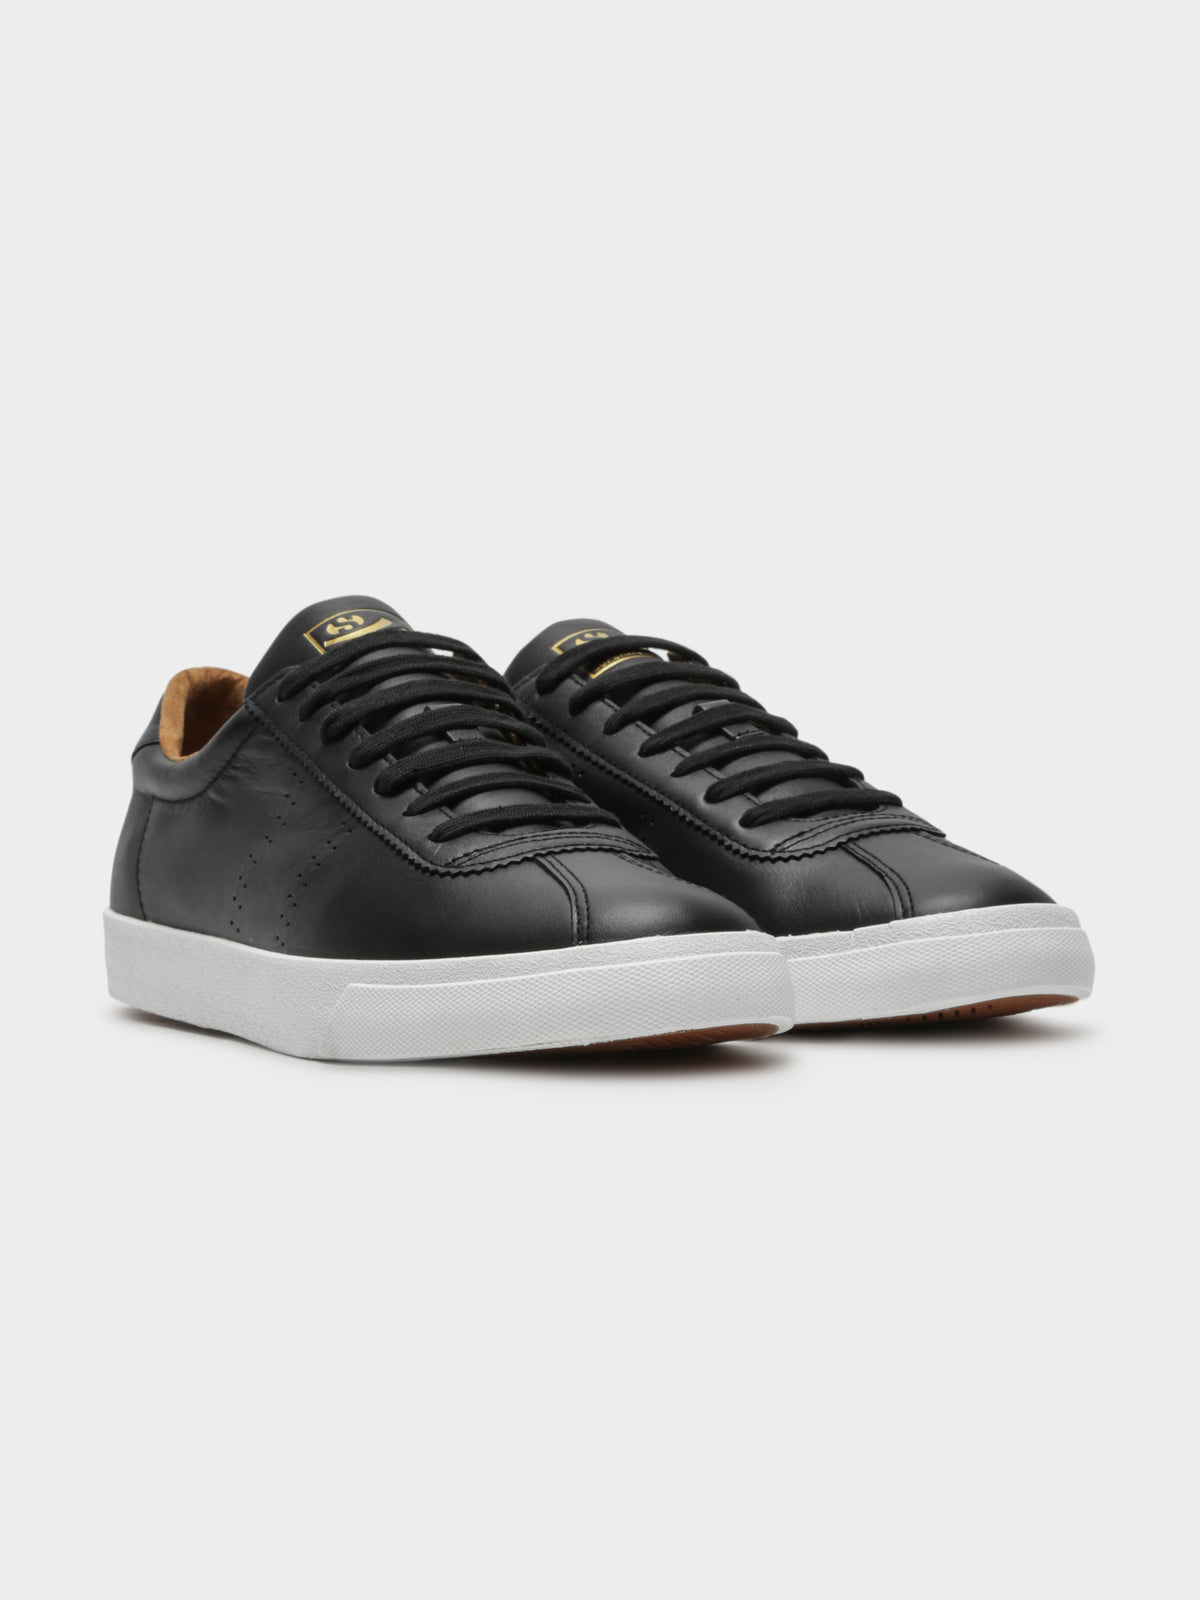 Mens 2843 Soft Leather Sneakers in Black